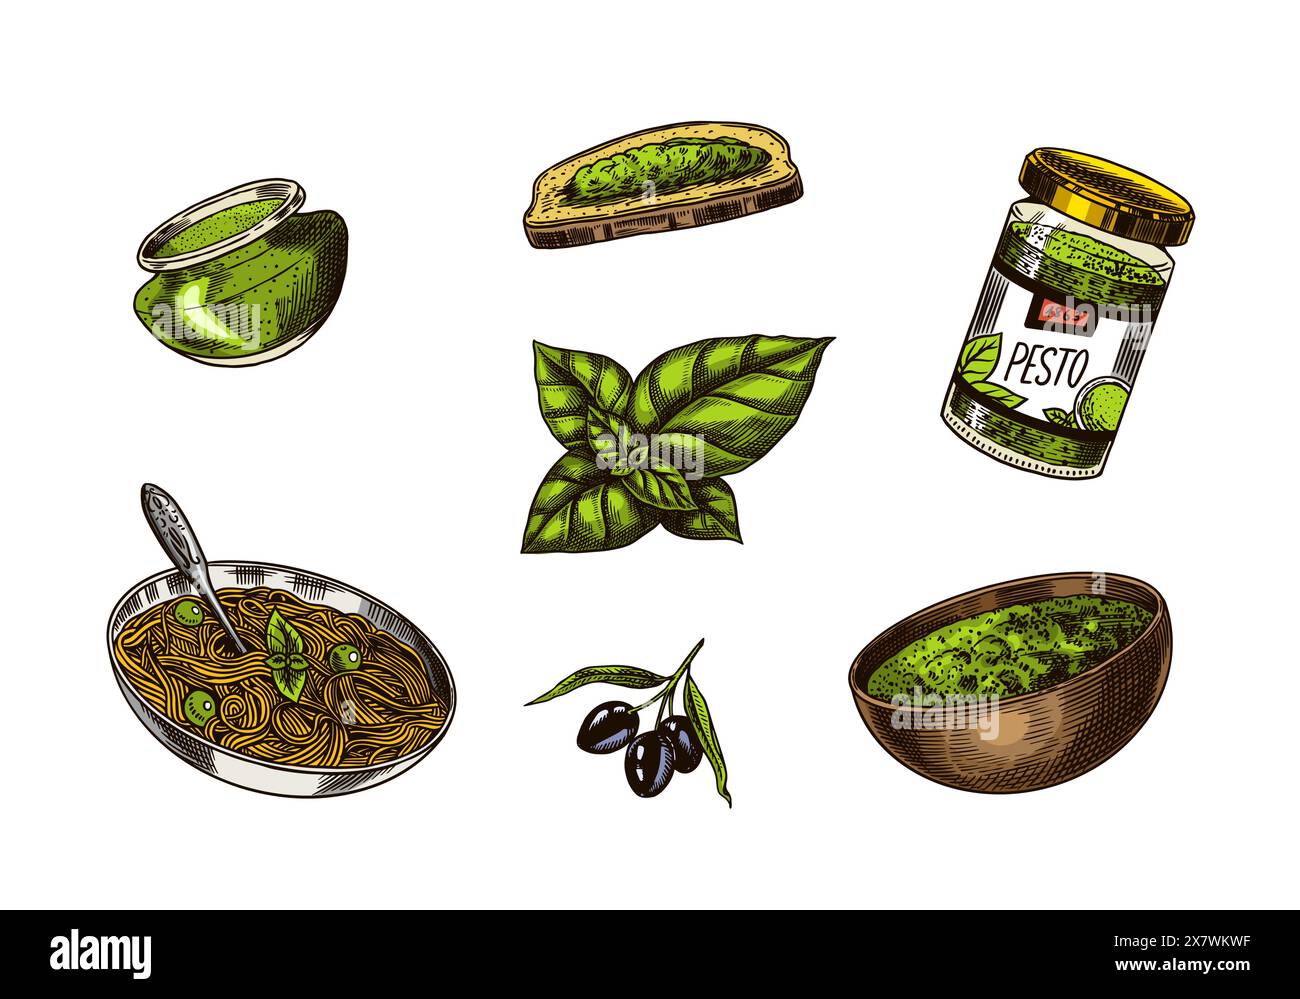 Pesto sauce set. Basil leaves, garlic, pine nuts, hard parmesan cheese, olive oil, pesto alla genovese. Spicy condiment, glass bottle, wooden spoon or Stock Vector